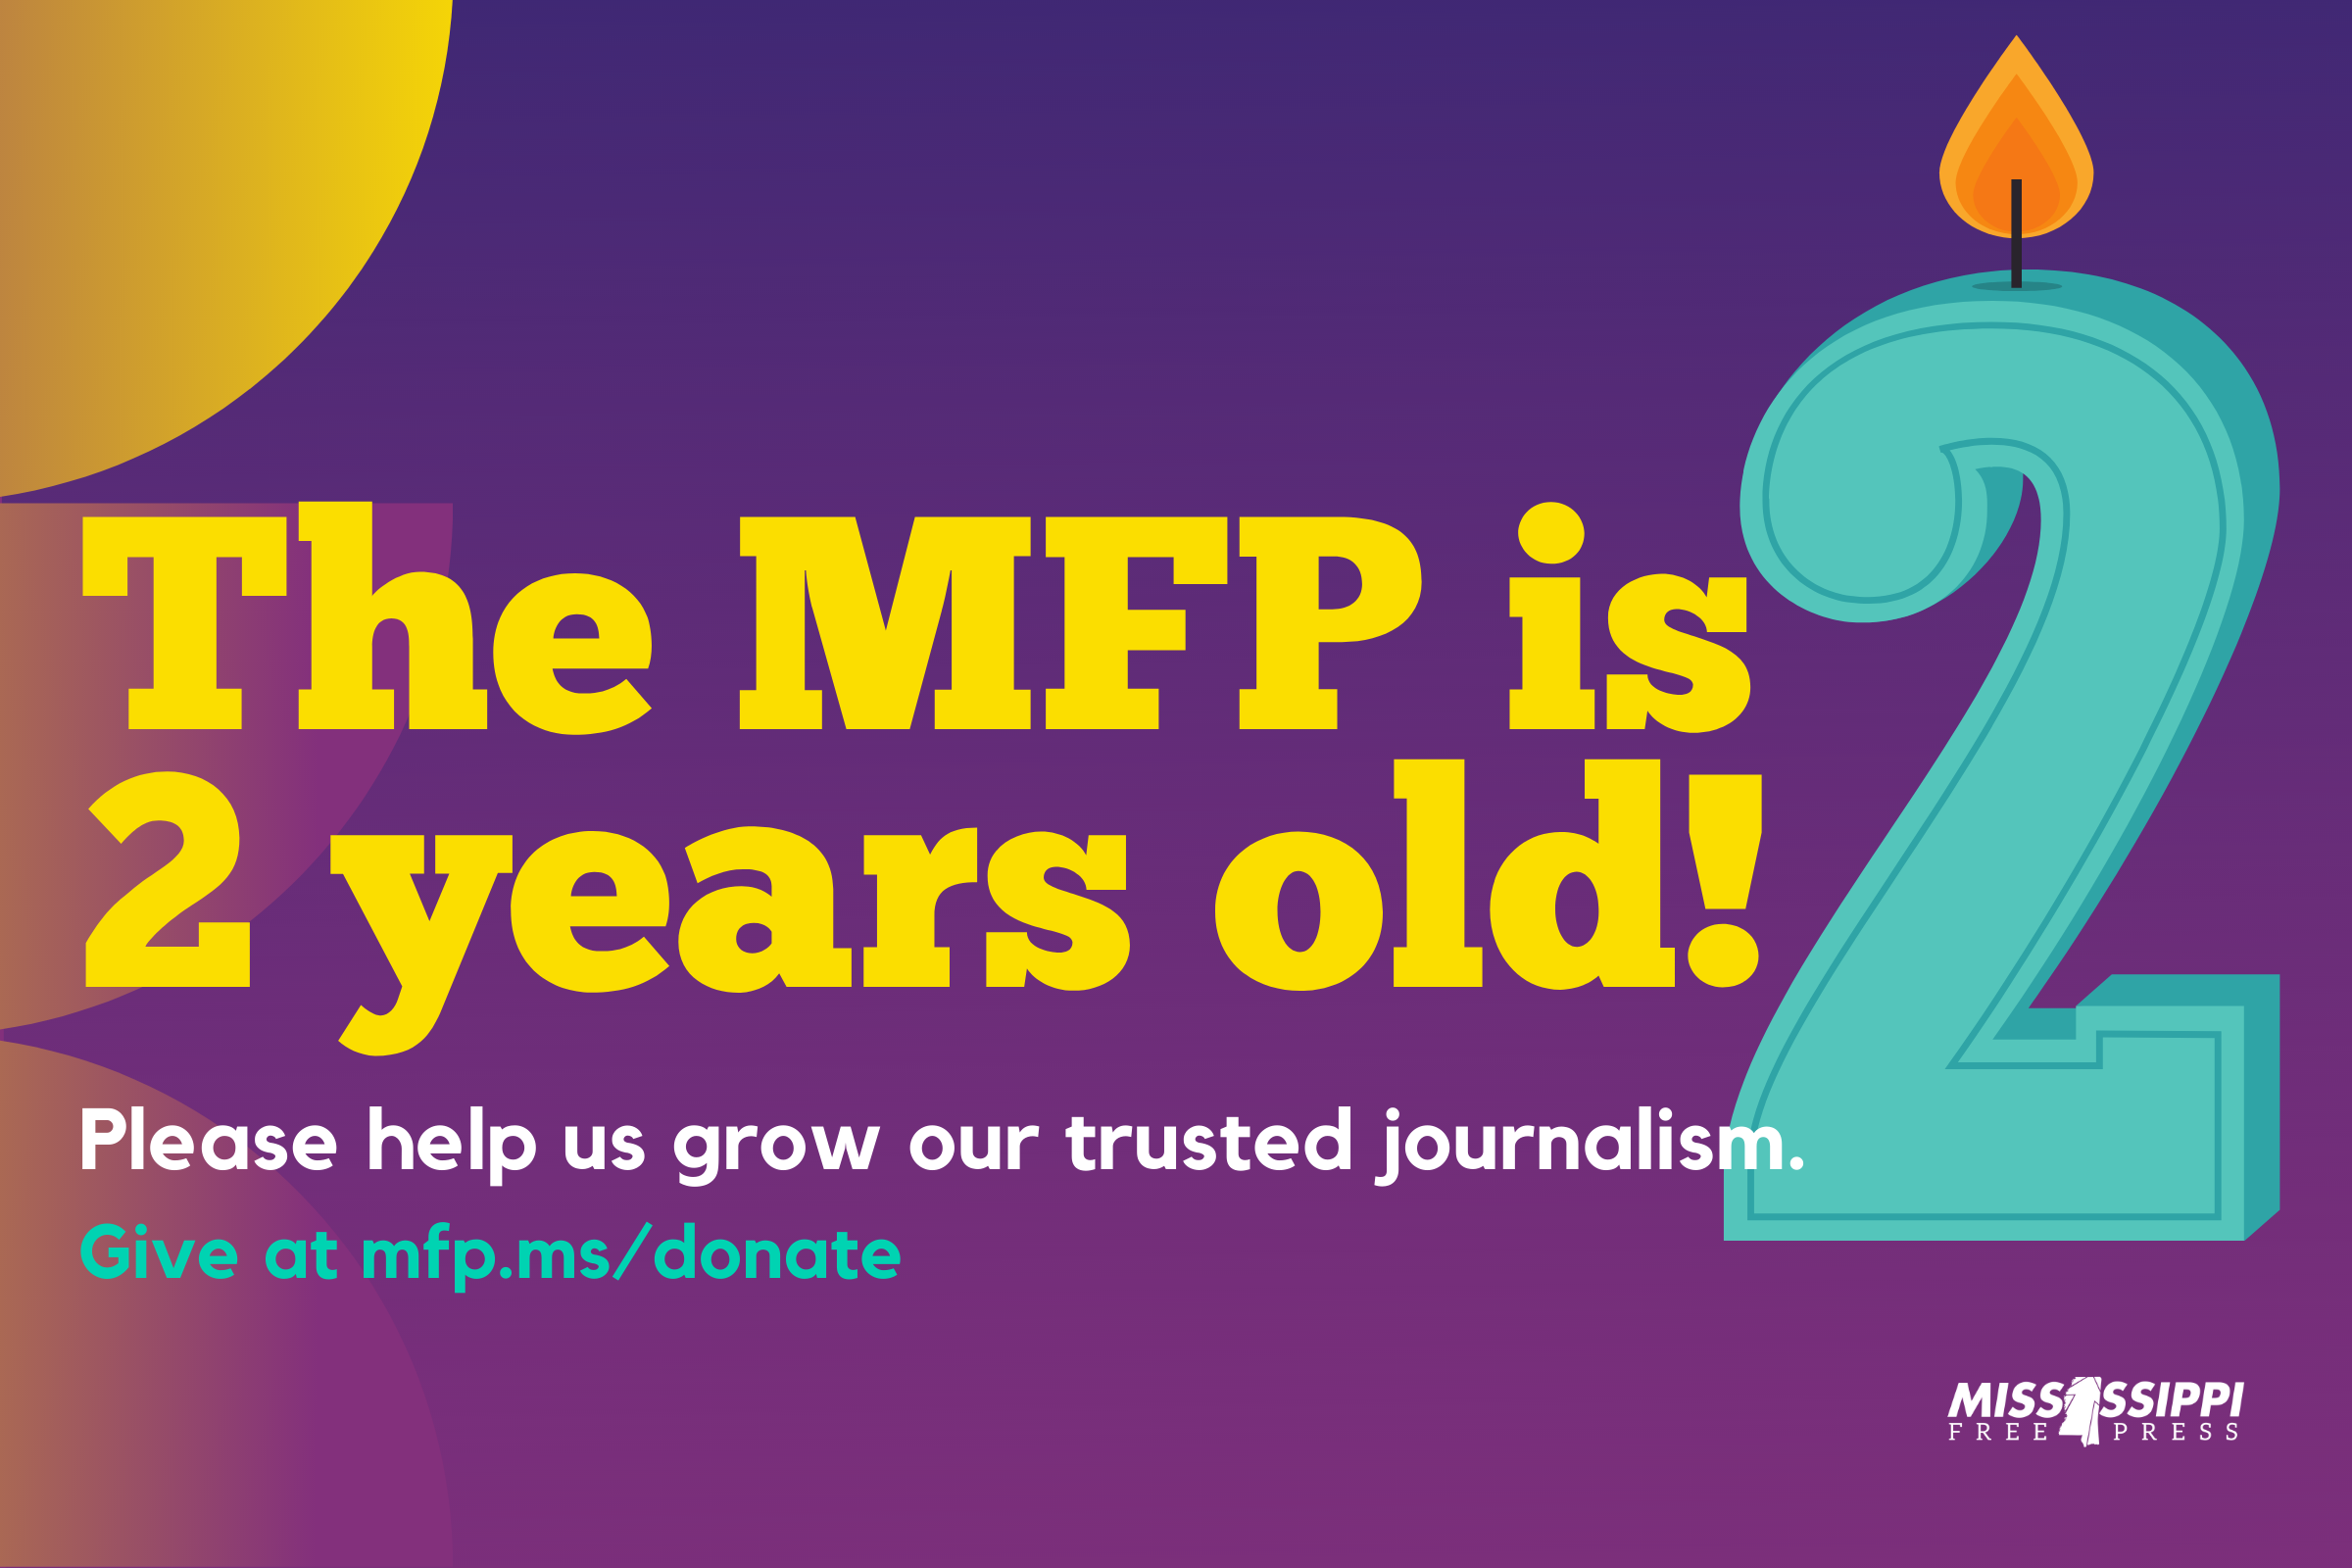 The MFP is 2 years old